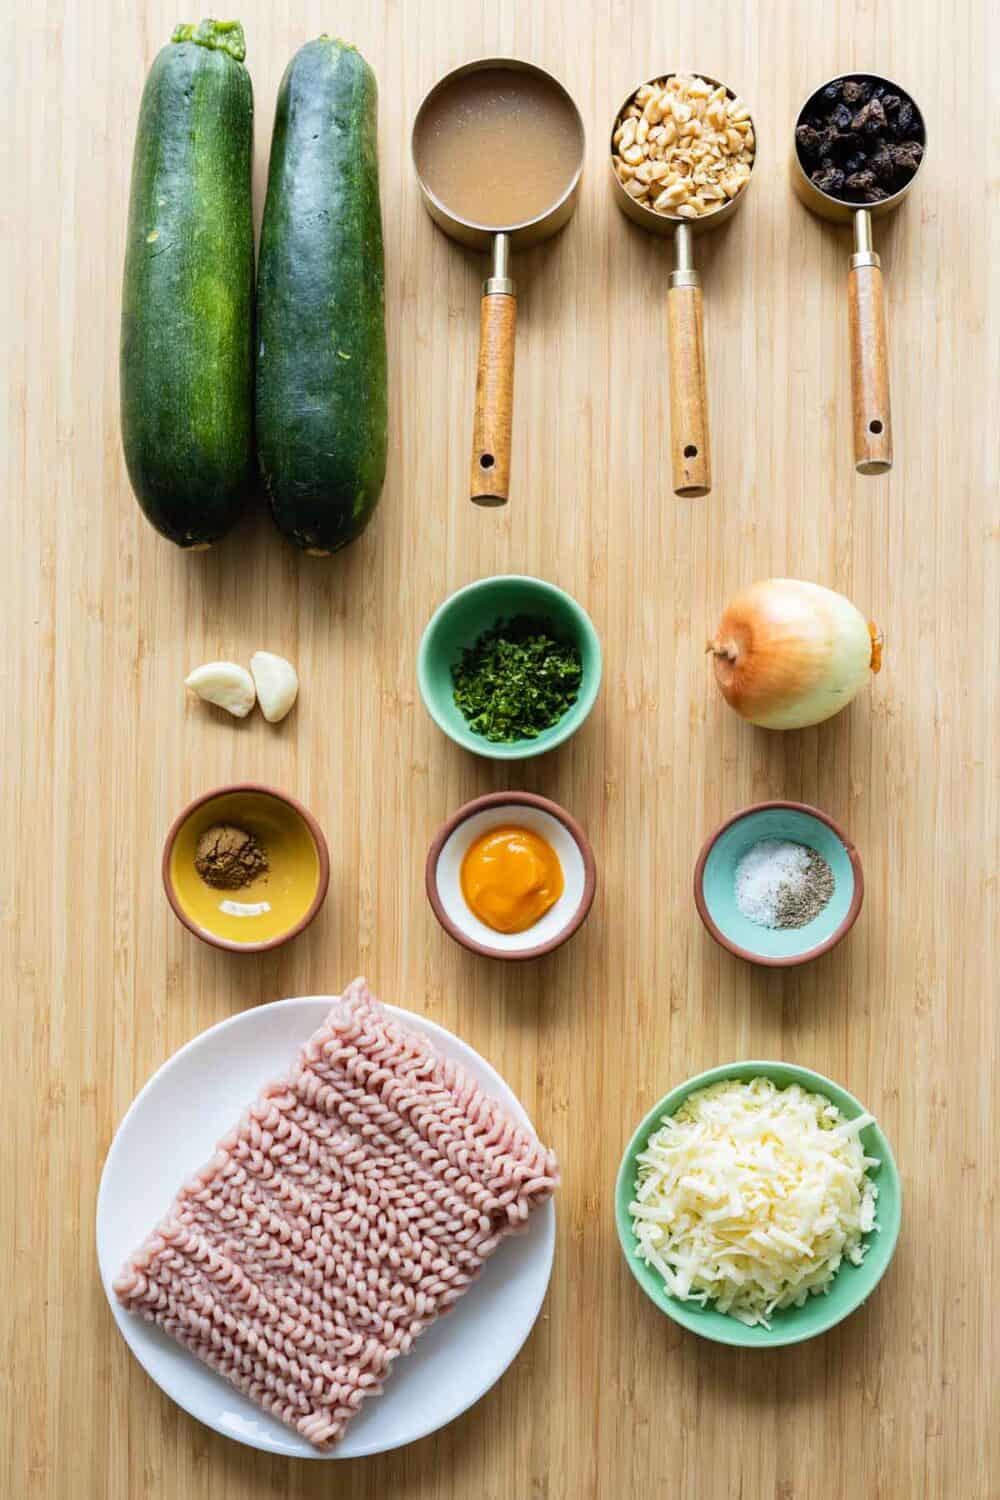 Ingredients for Stuffed Zucchini boats laid out on a kitchen counter.